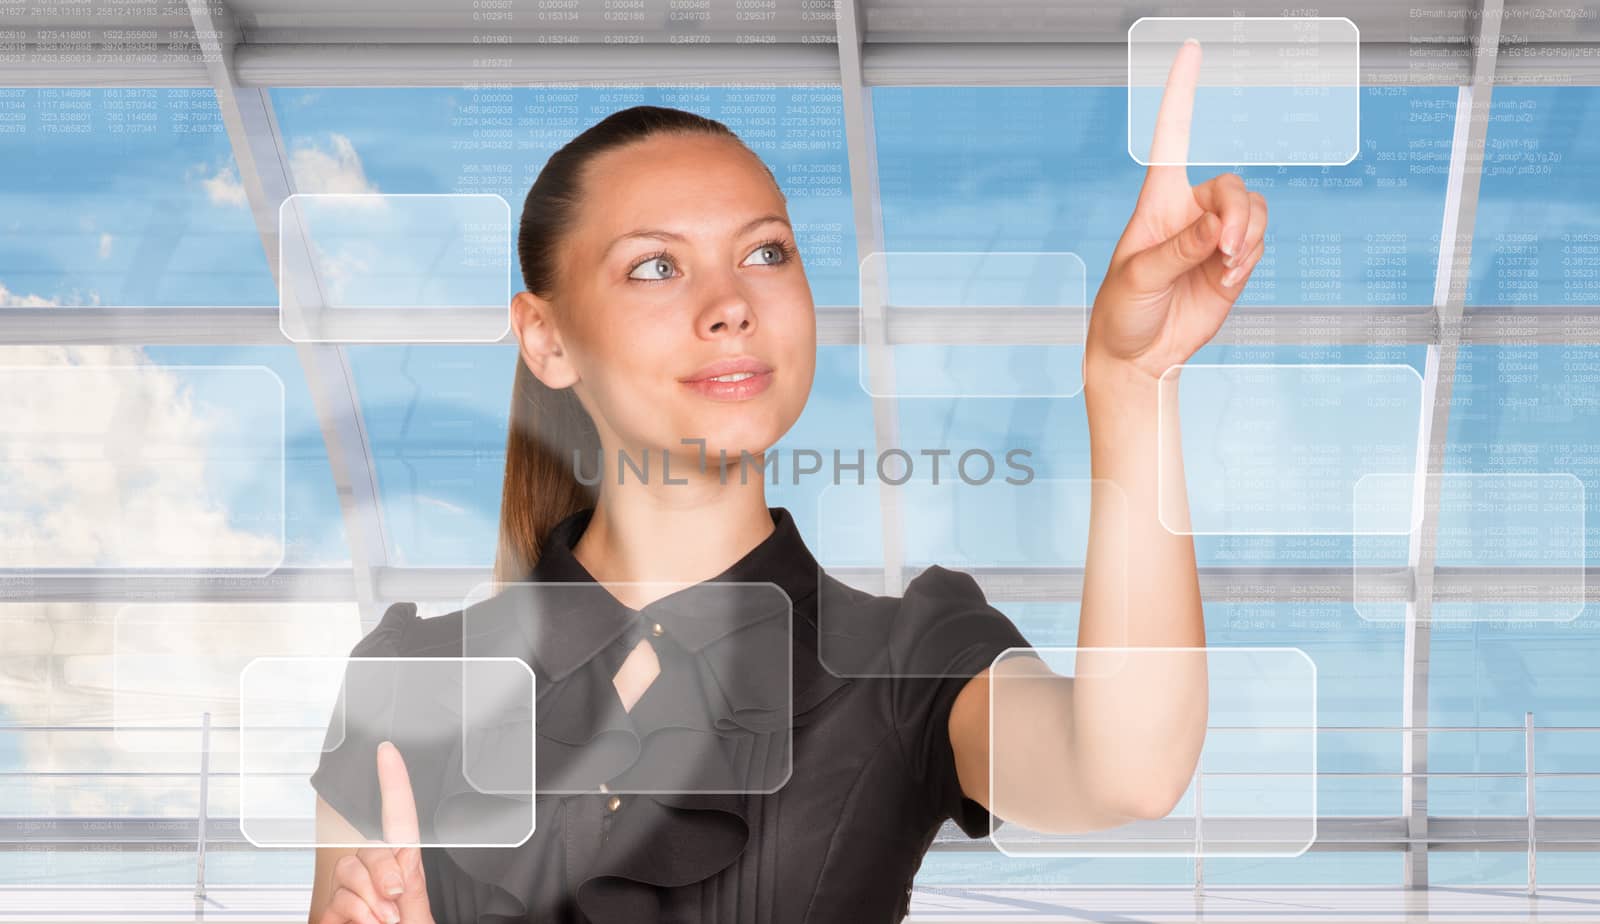 Smiling businesswoman in dress pressing on holographic screen with squares and numbers